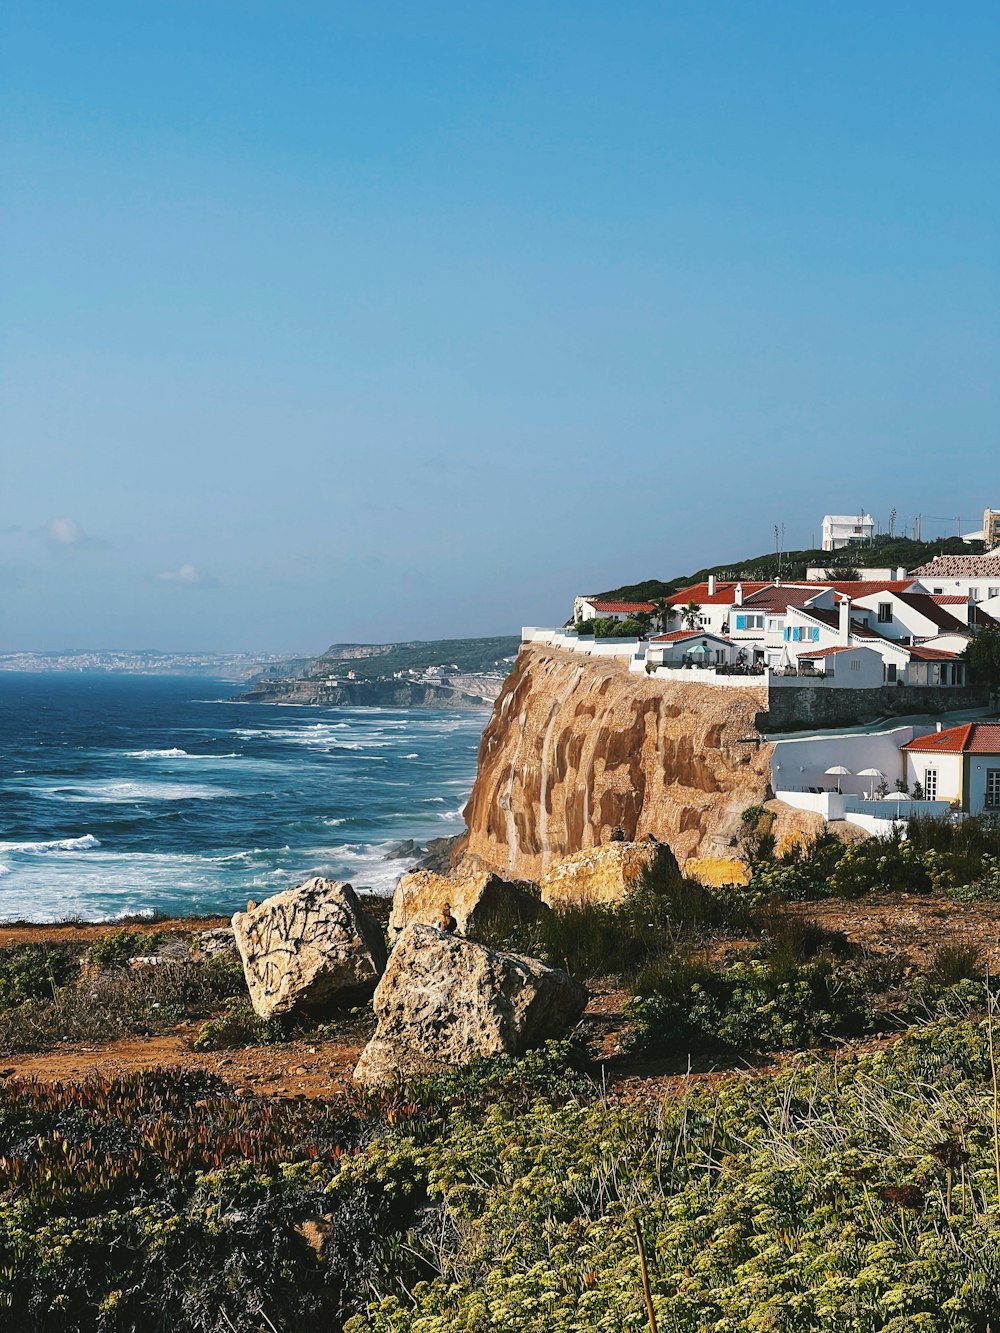 a view of a beach with houses on the cliff